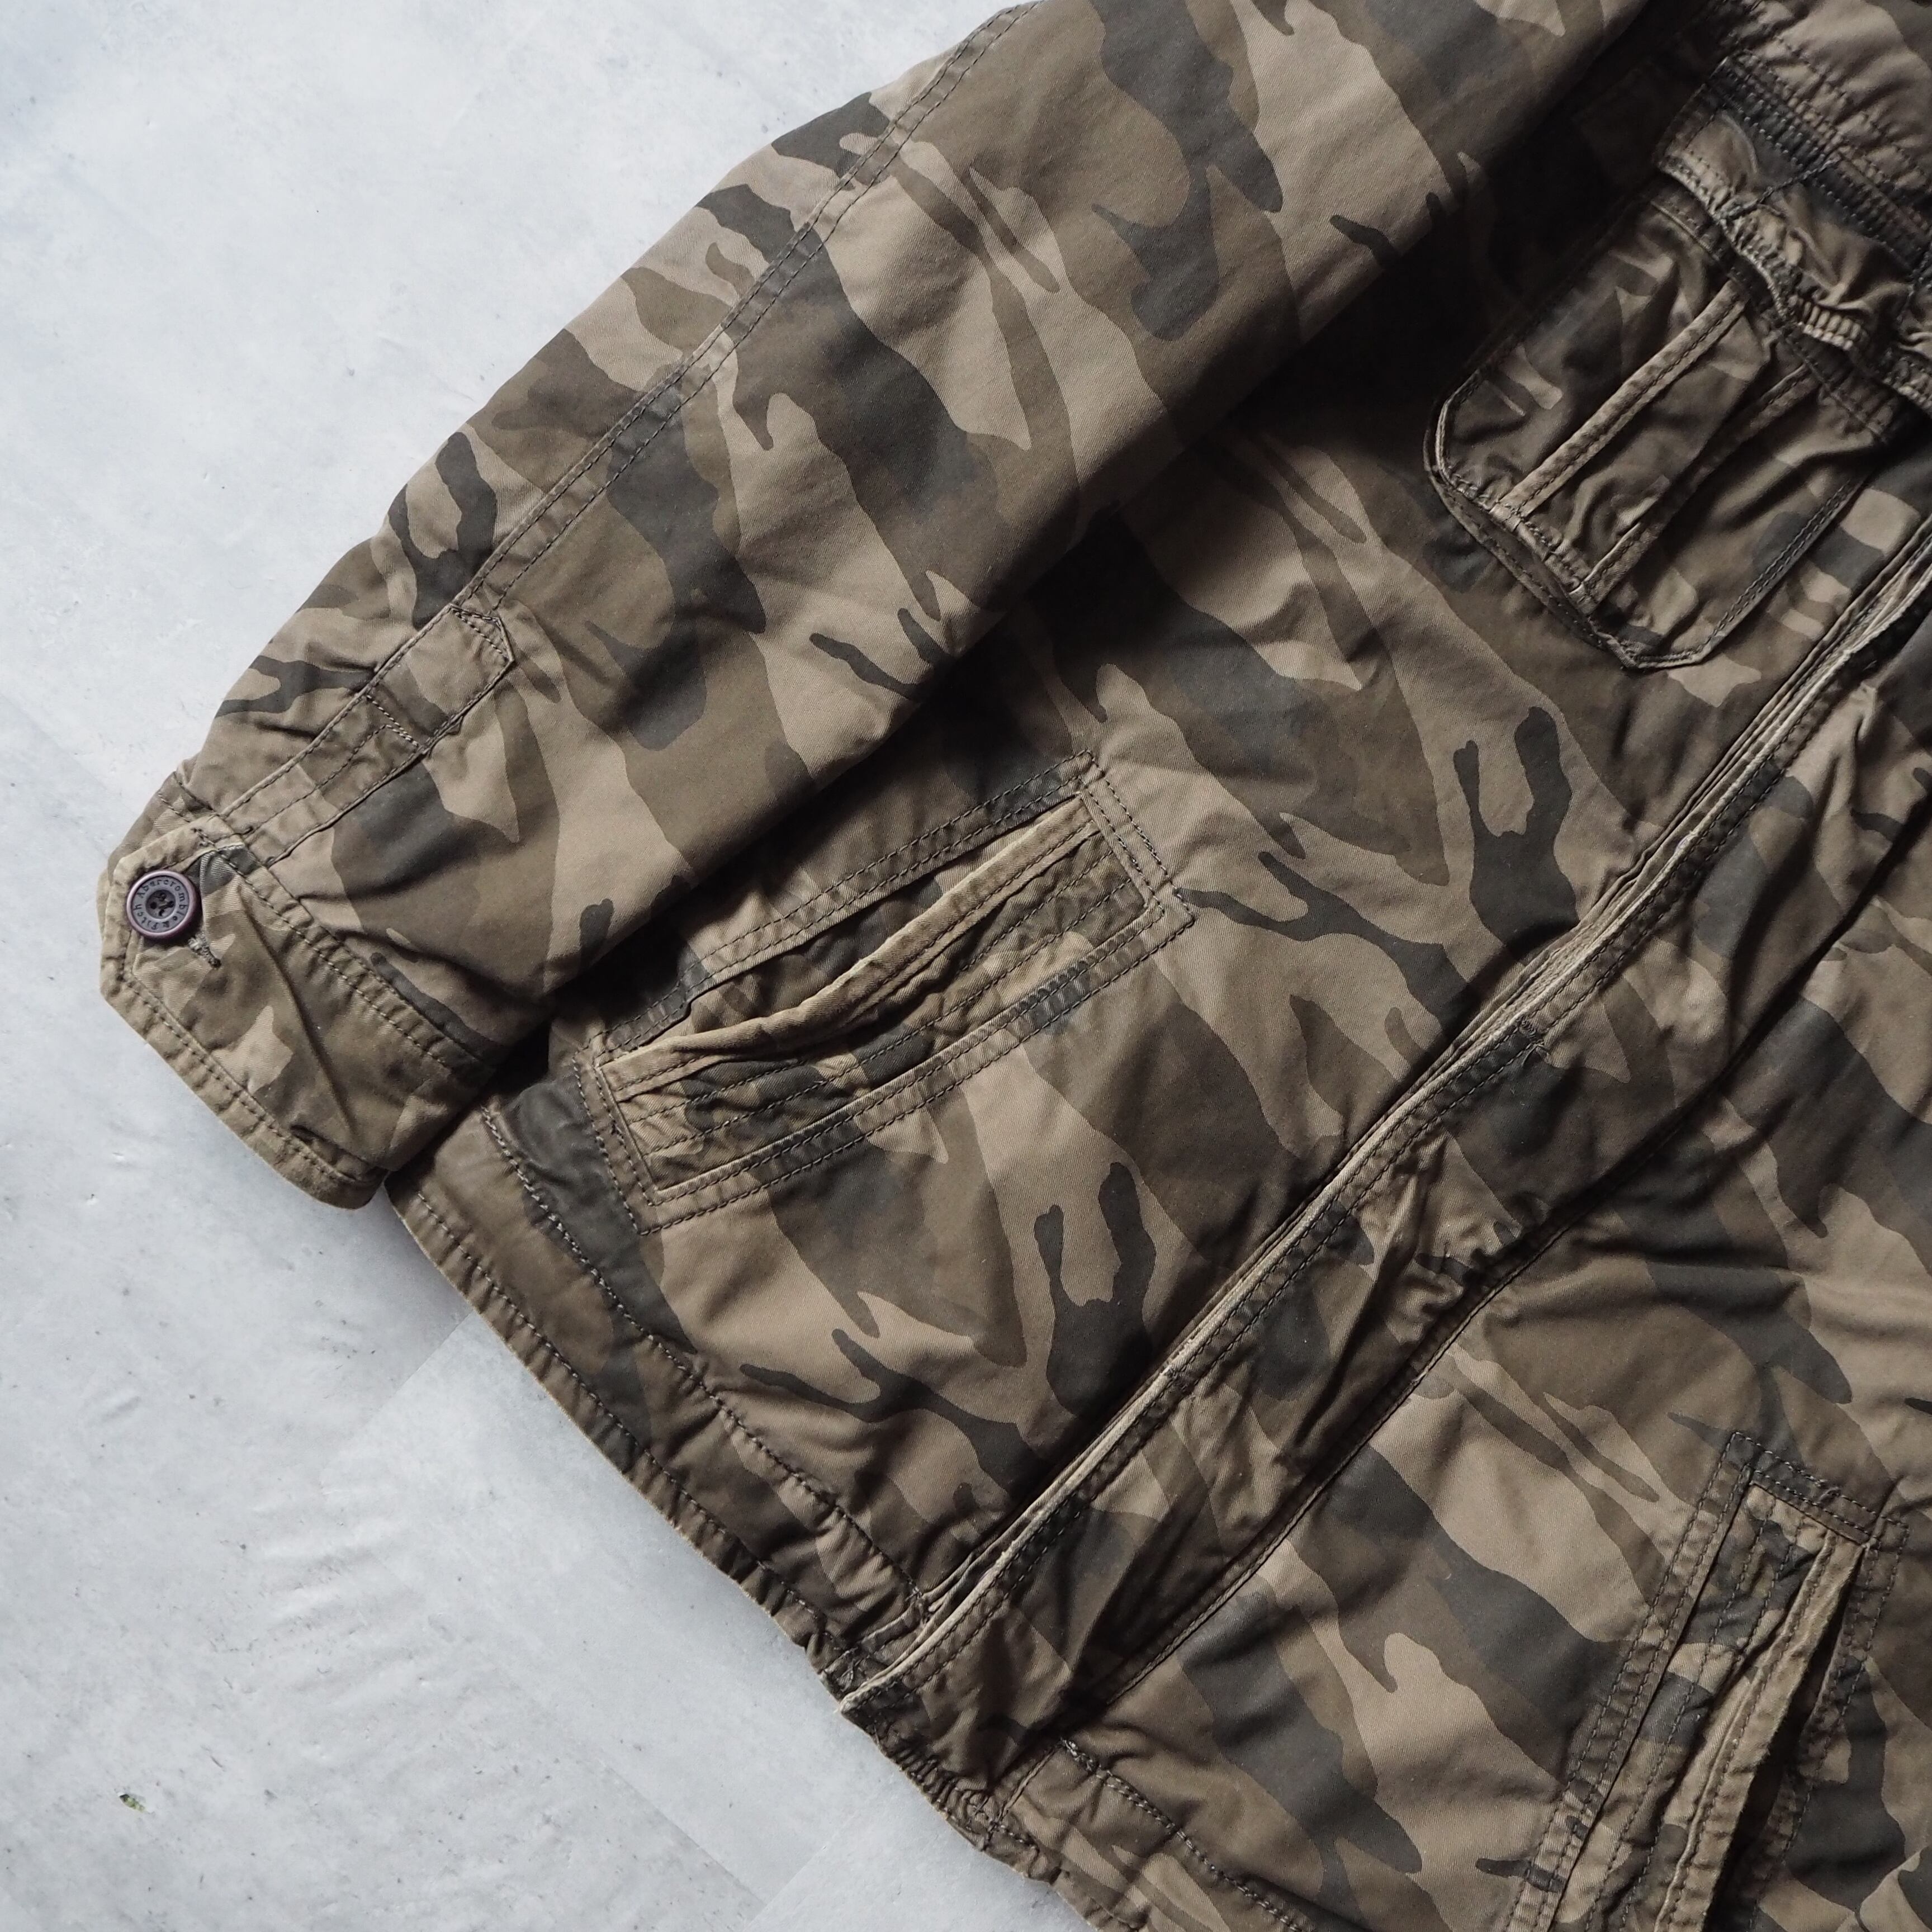 00s “ Abercrombie & Fitch” M-65 type brown woodland camo pattern